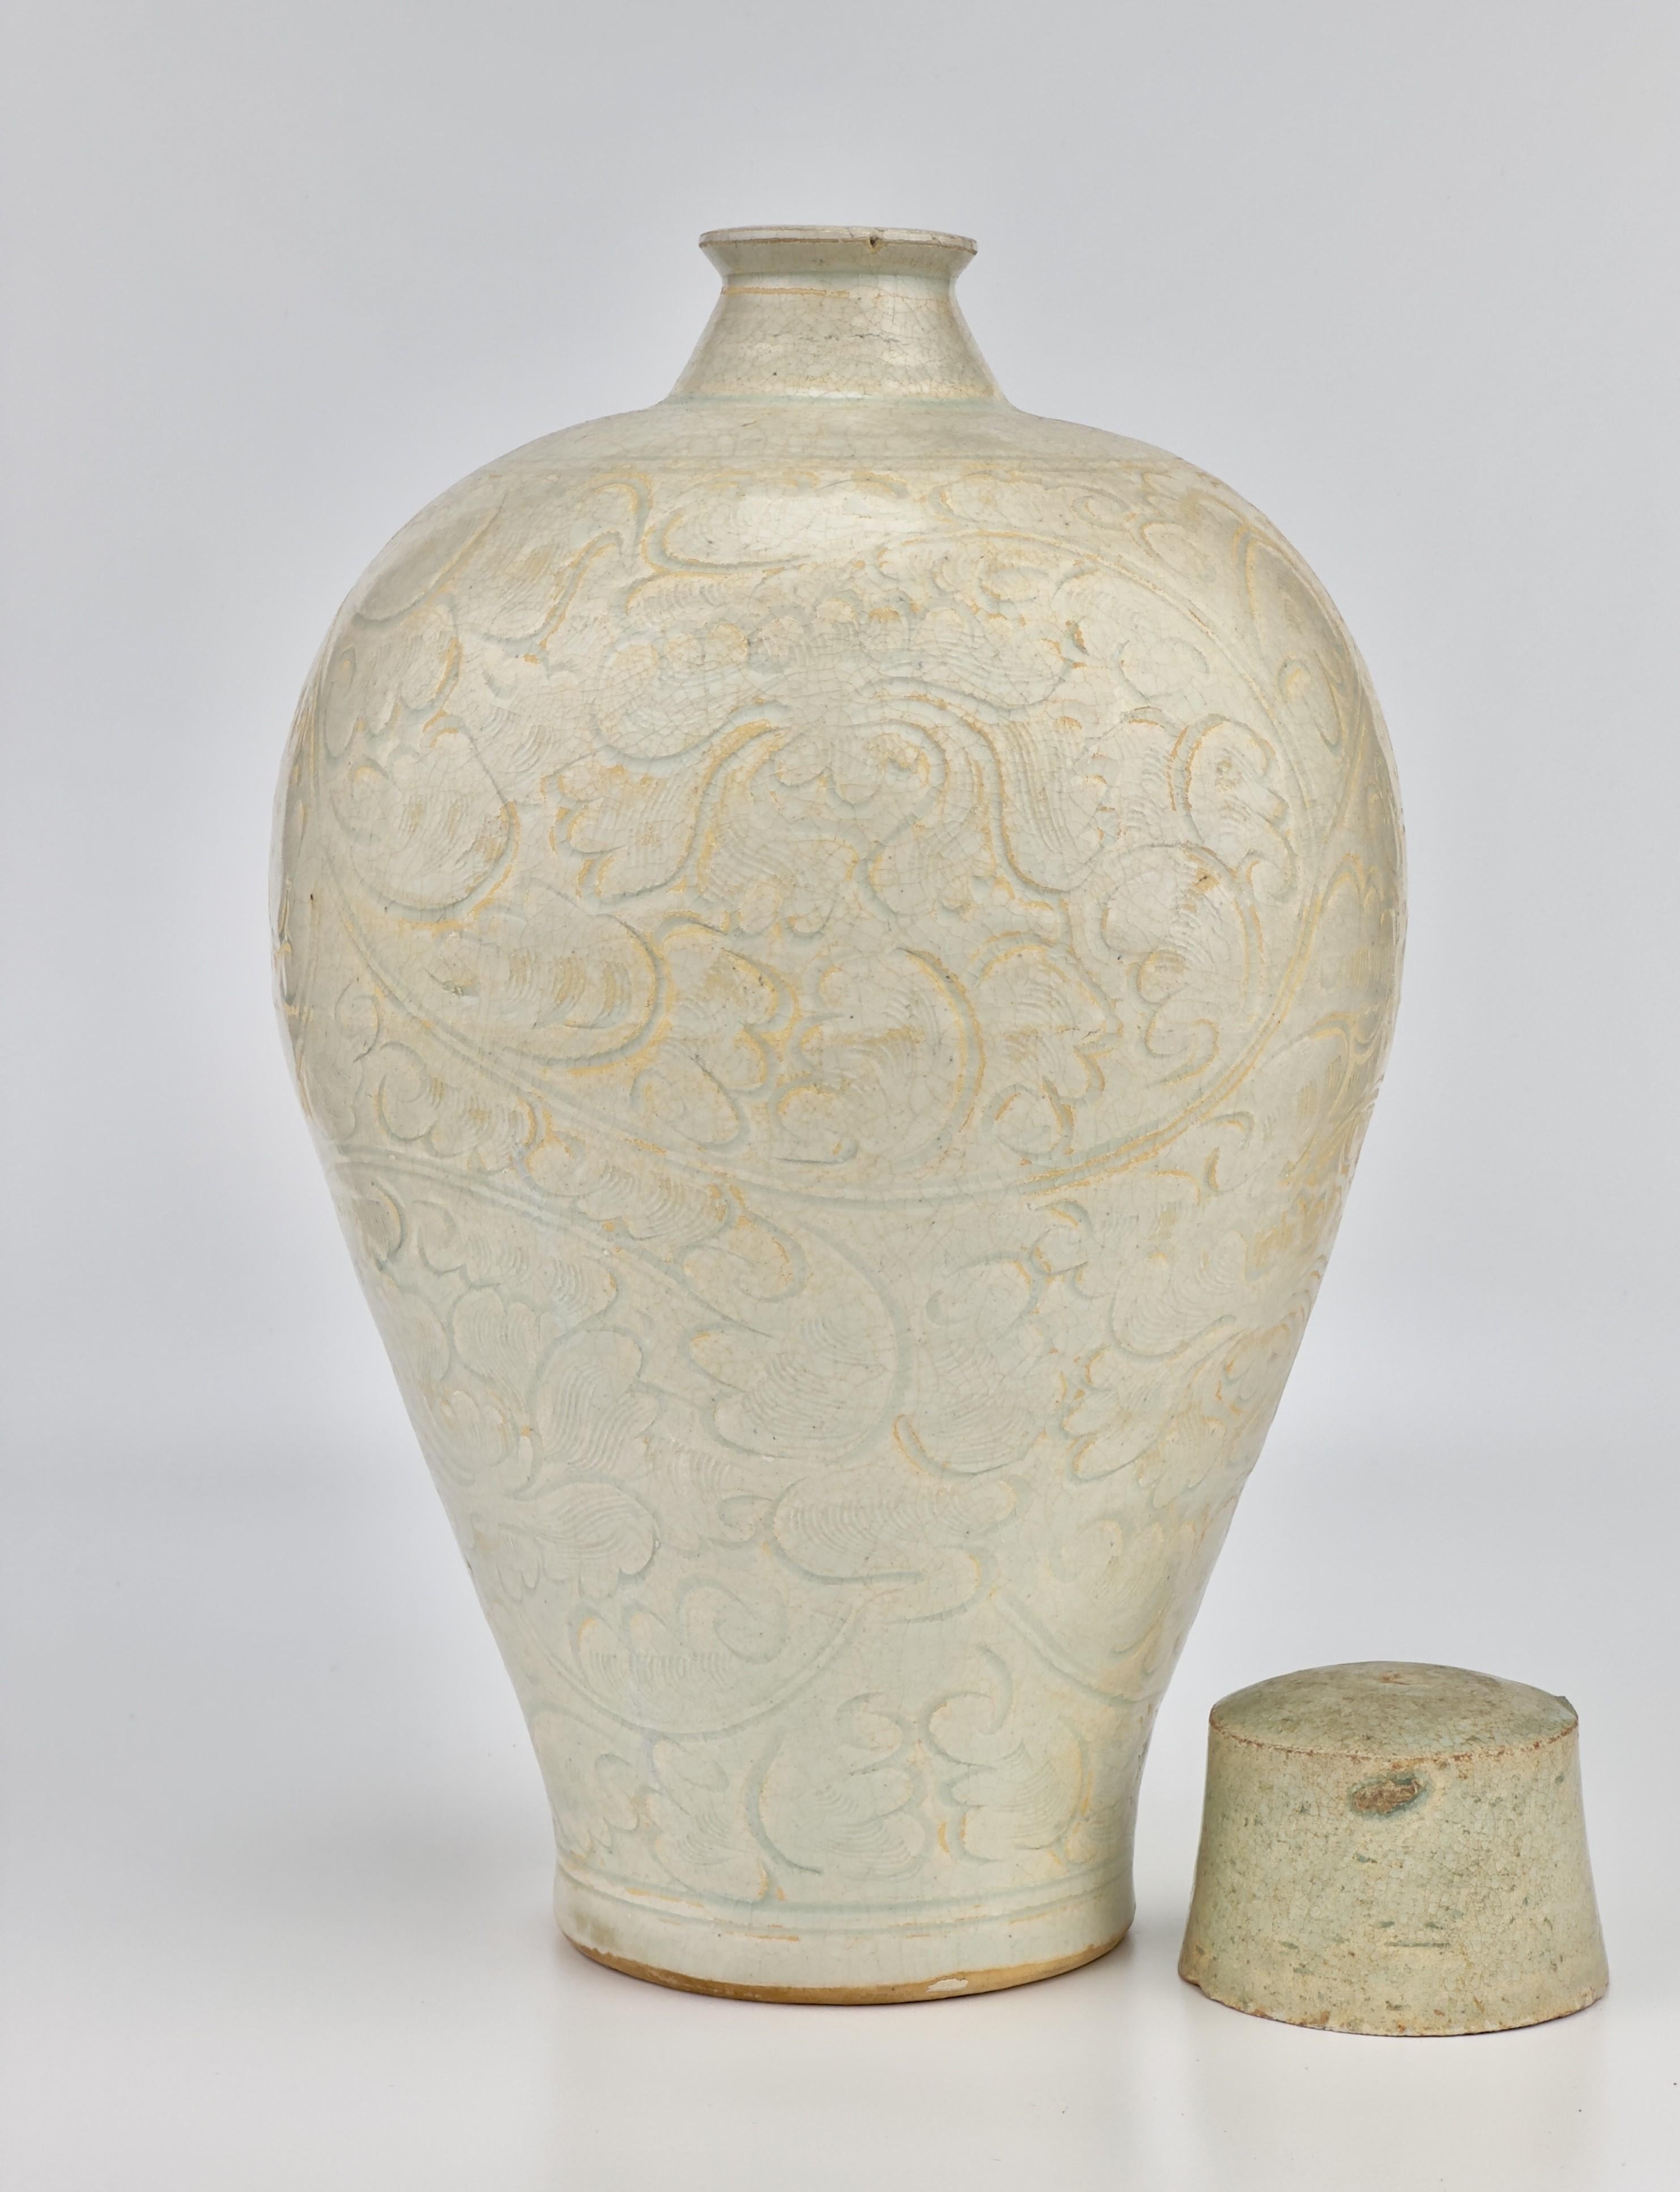 The vase exhibits a finely crafted structure, characterized by its wide shoulders and elongated, tapering sides, topped with a compact, ribbed cylindrical neck. Its exterior is adorned with intricately carved scrolling foliage motifs, accentuated by